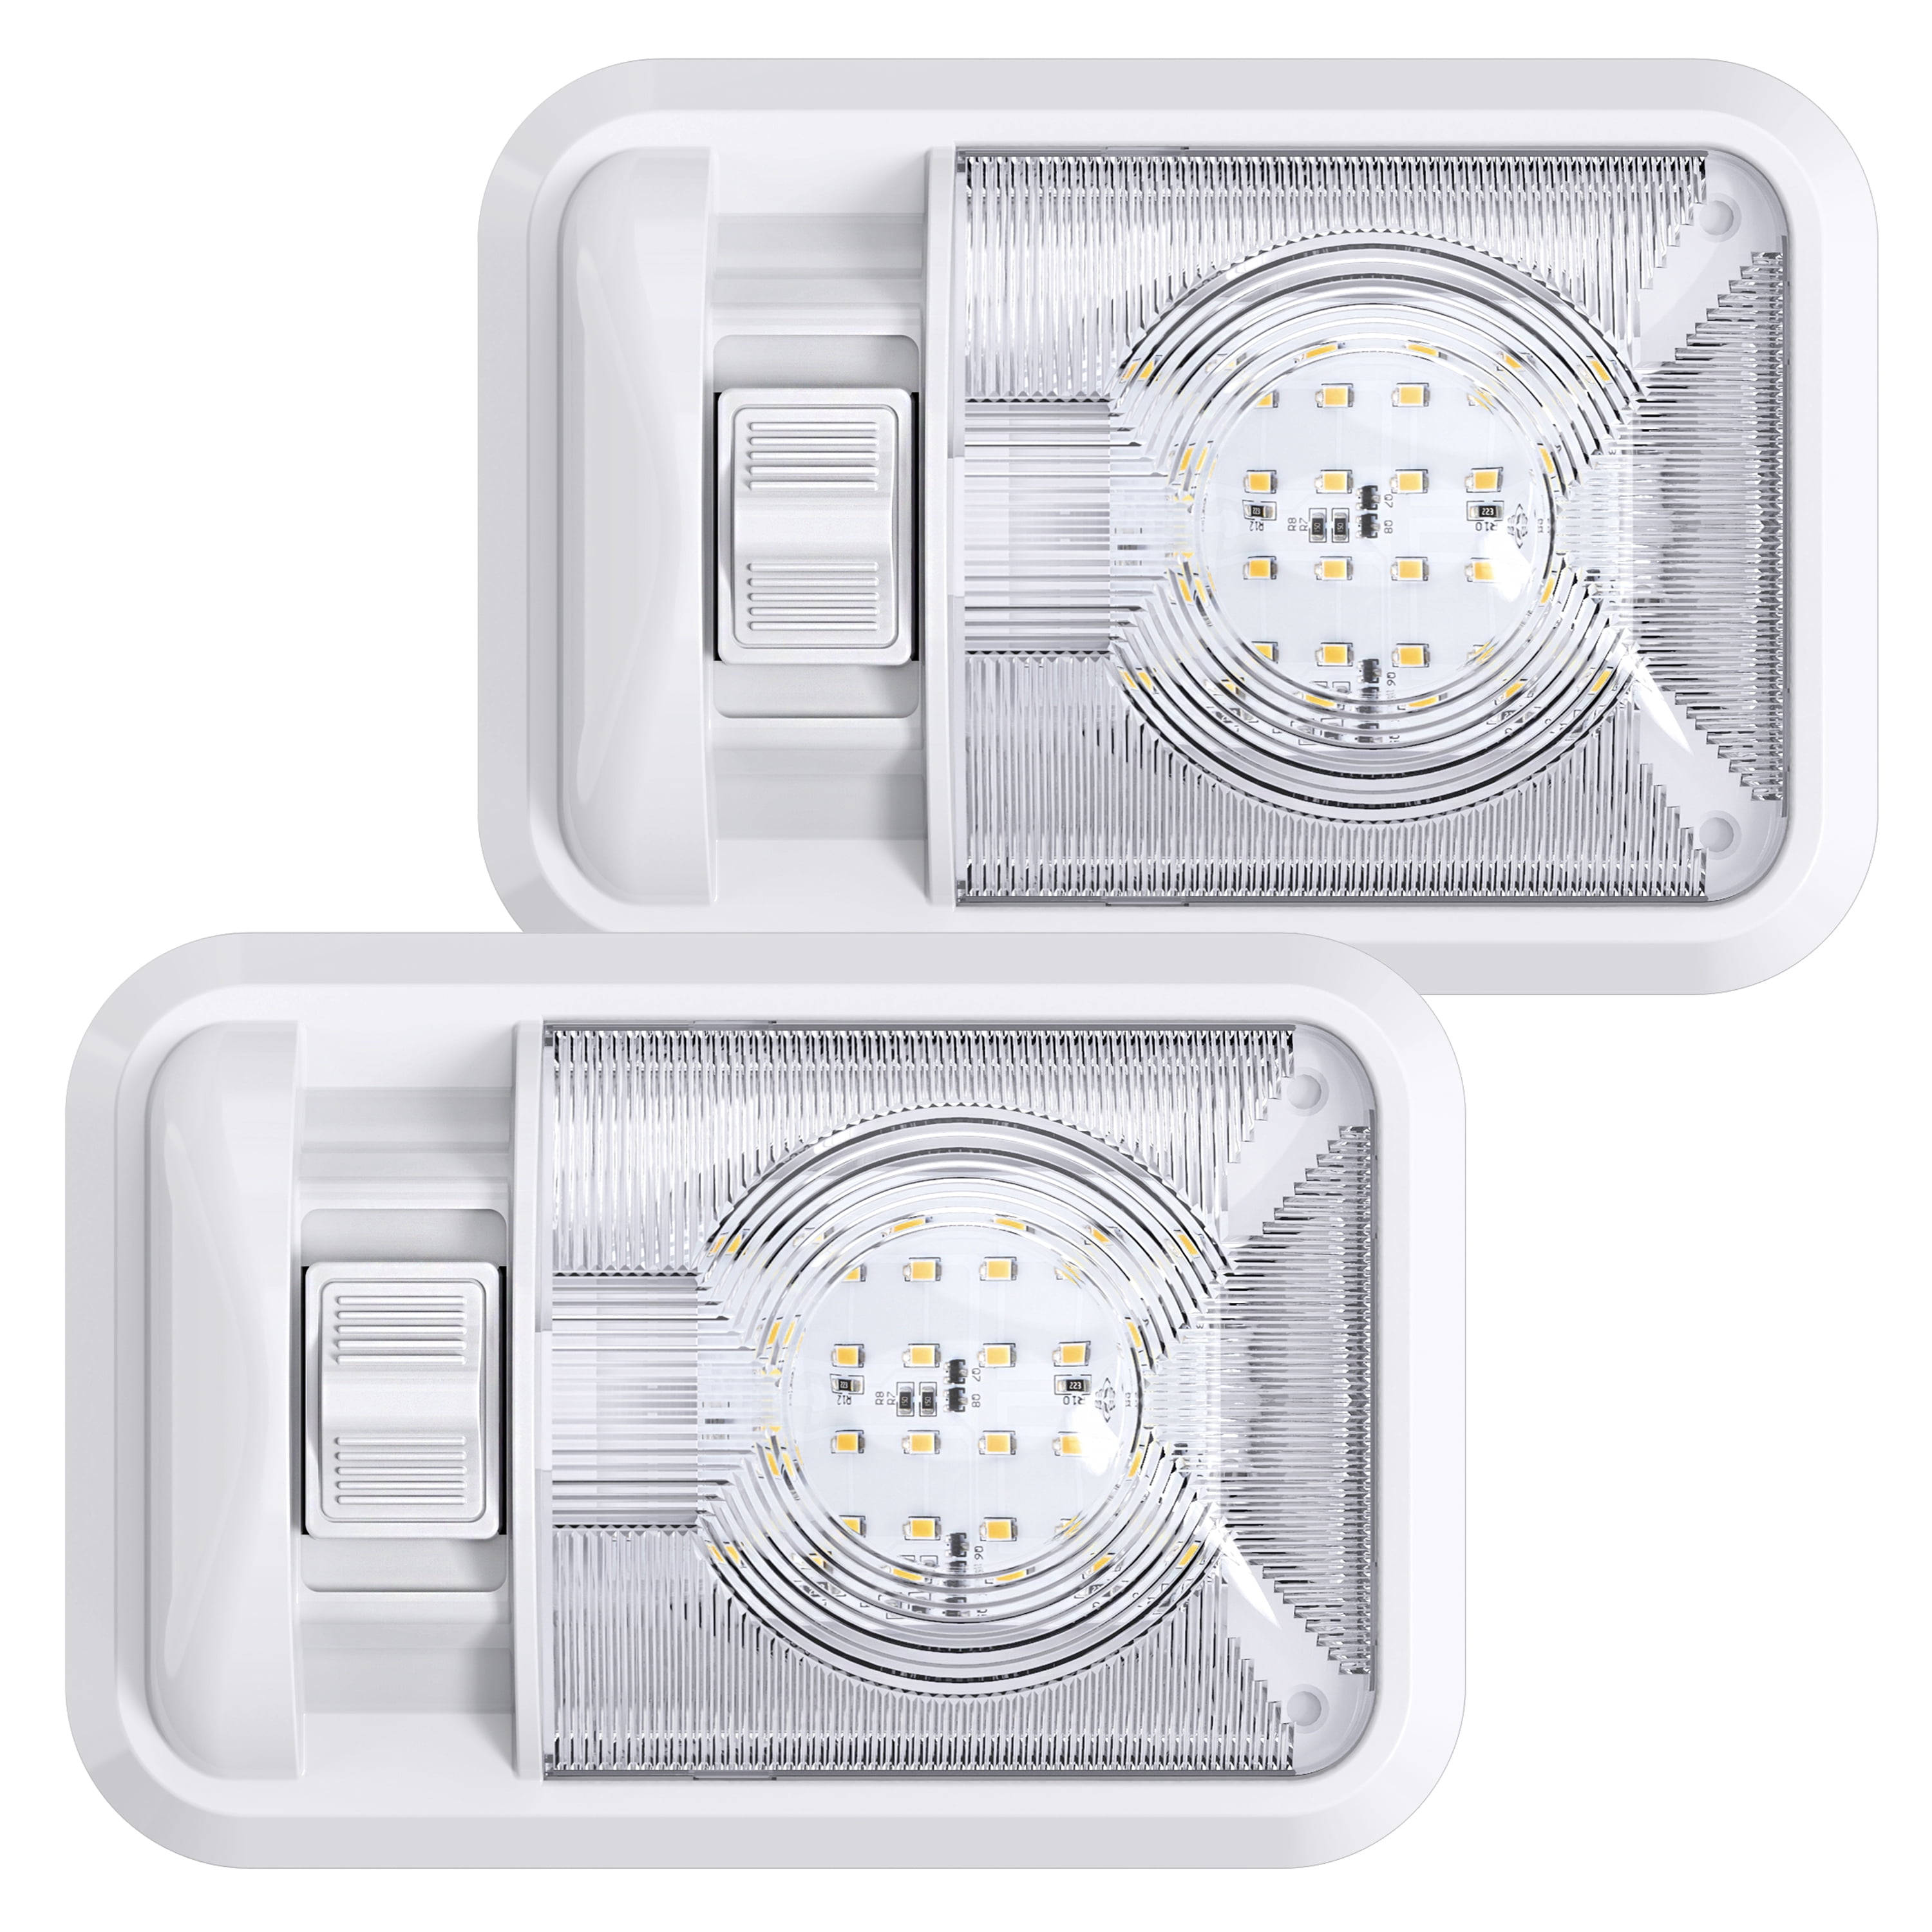 Leisure LED RV LED Ceiling Light 11 x 5 Fixture 700 Lumen with Slide  Dimmer Switch